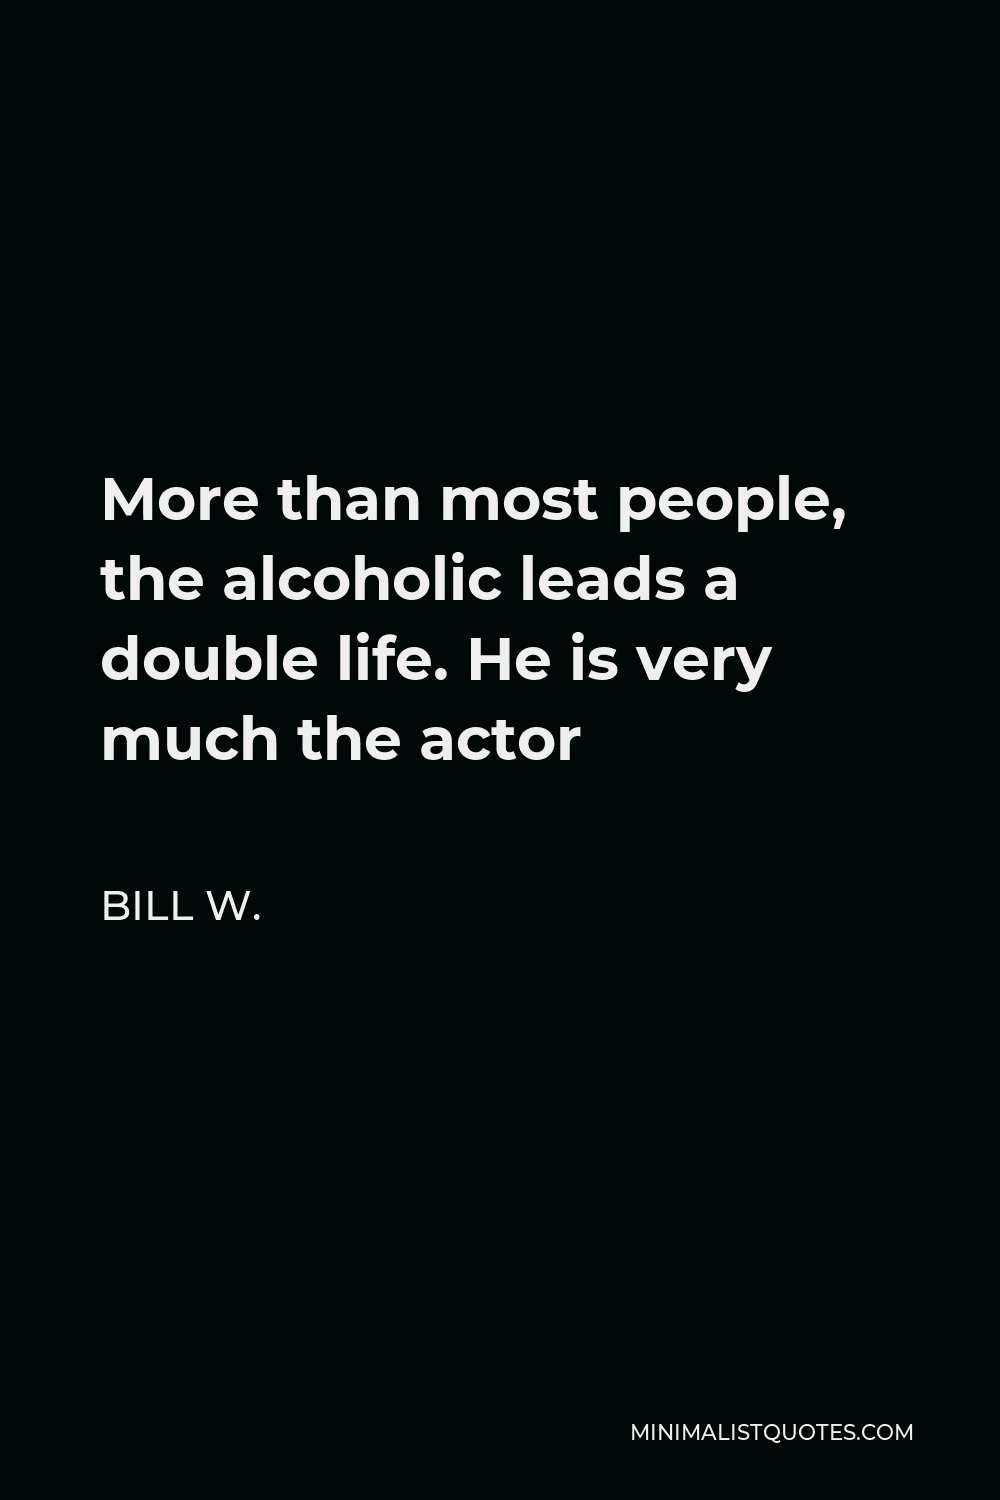 Bill W. Quote - More than most people, the alcoholic leads a double life. He is very much the actor